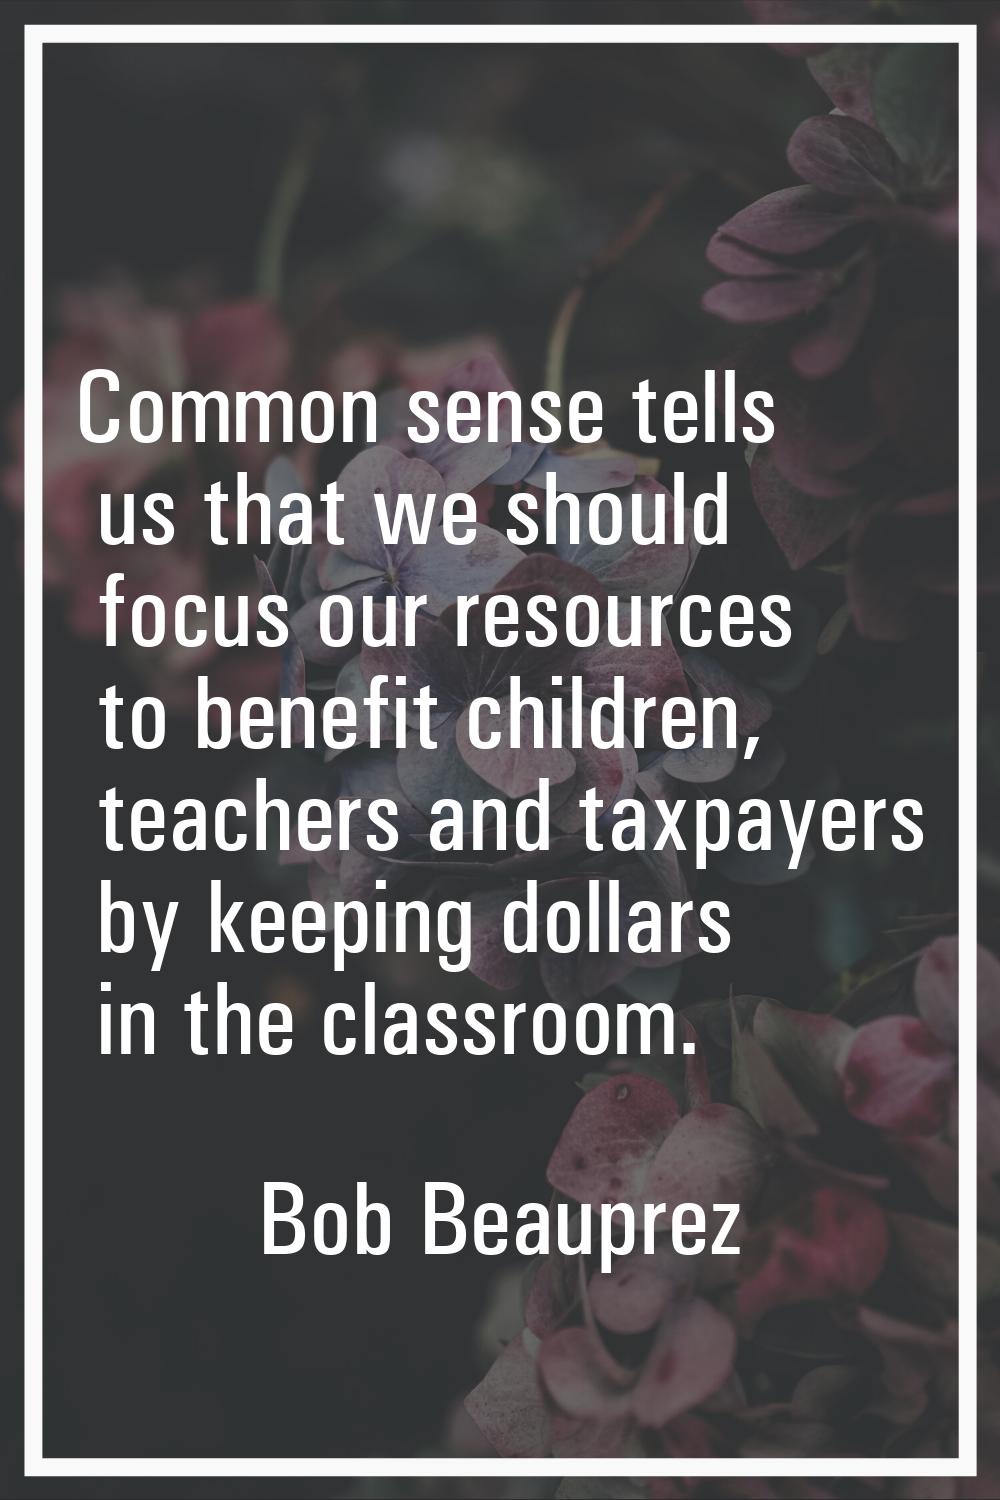 Common sense tells us that we should focus our resources to benefit children, teachers and taxpayer